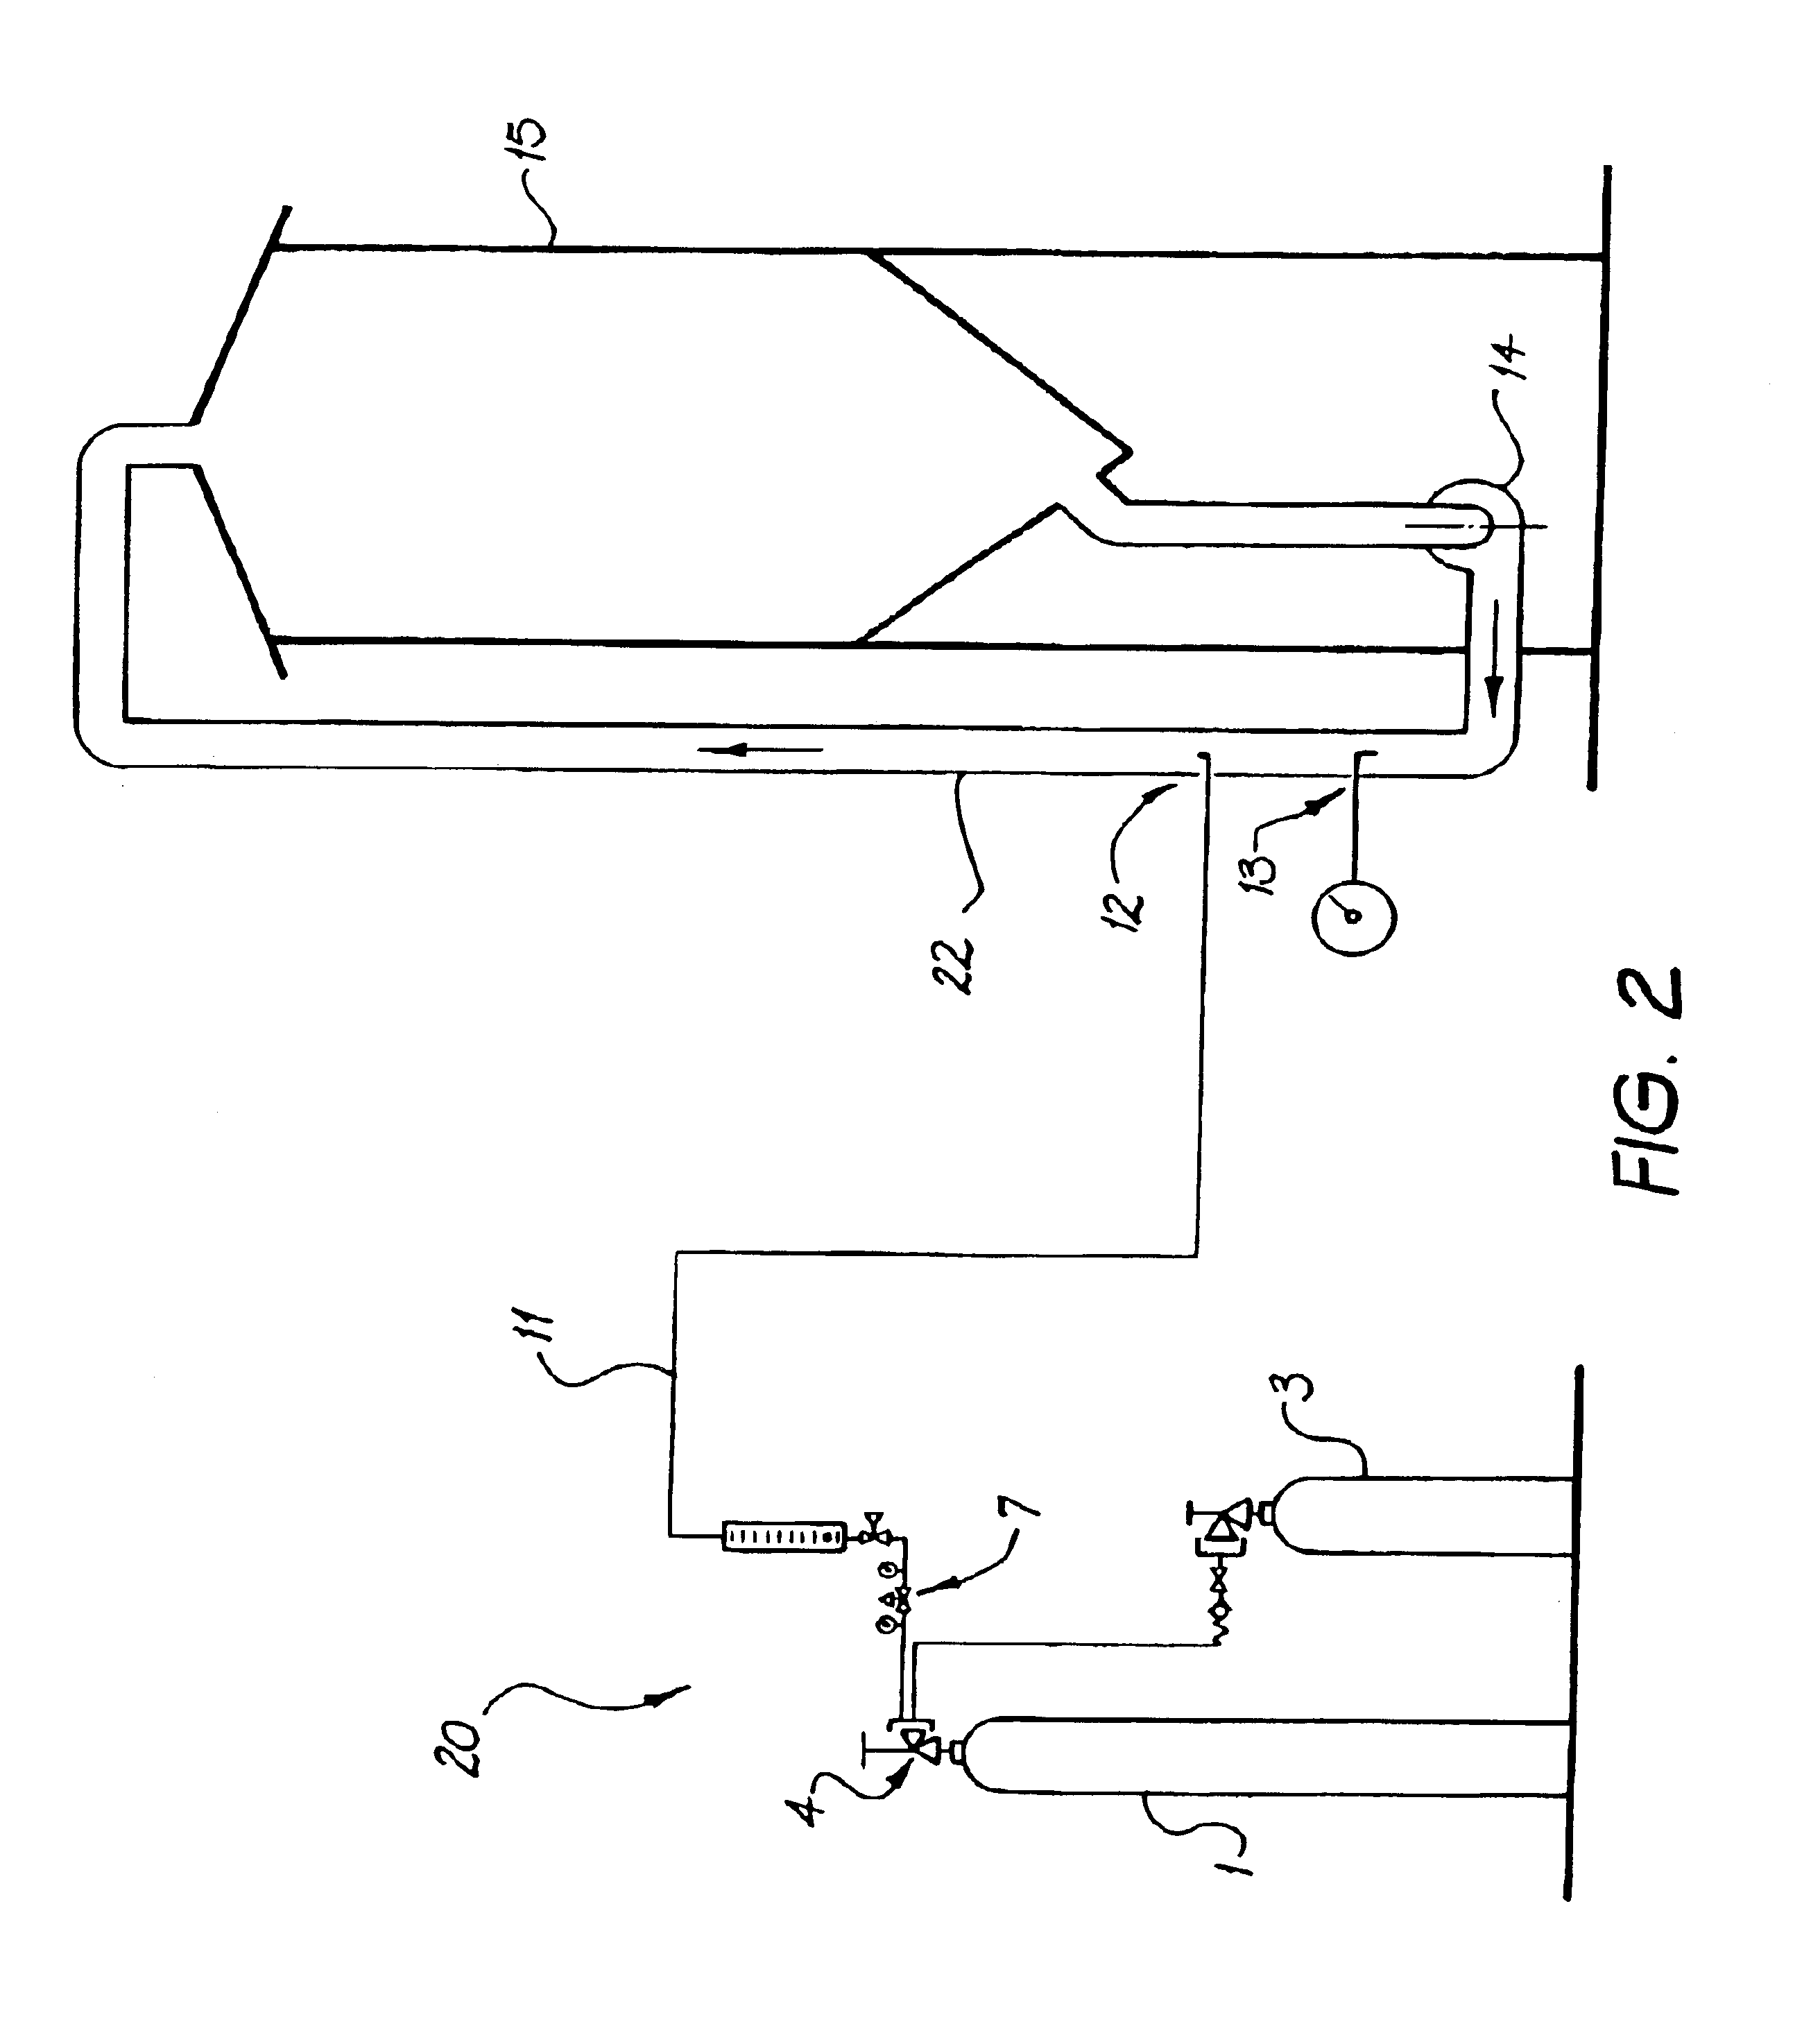 Process and apparatus for supplying a gaseous mixture